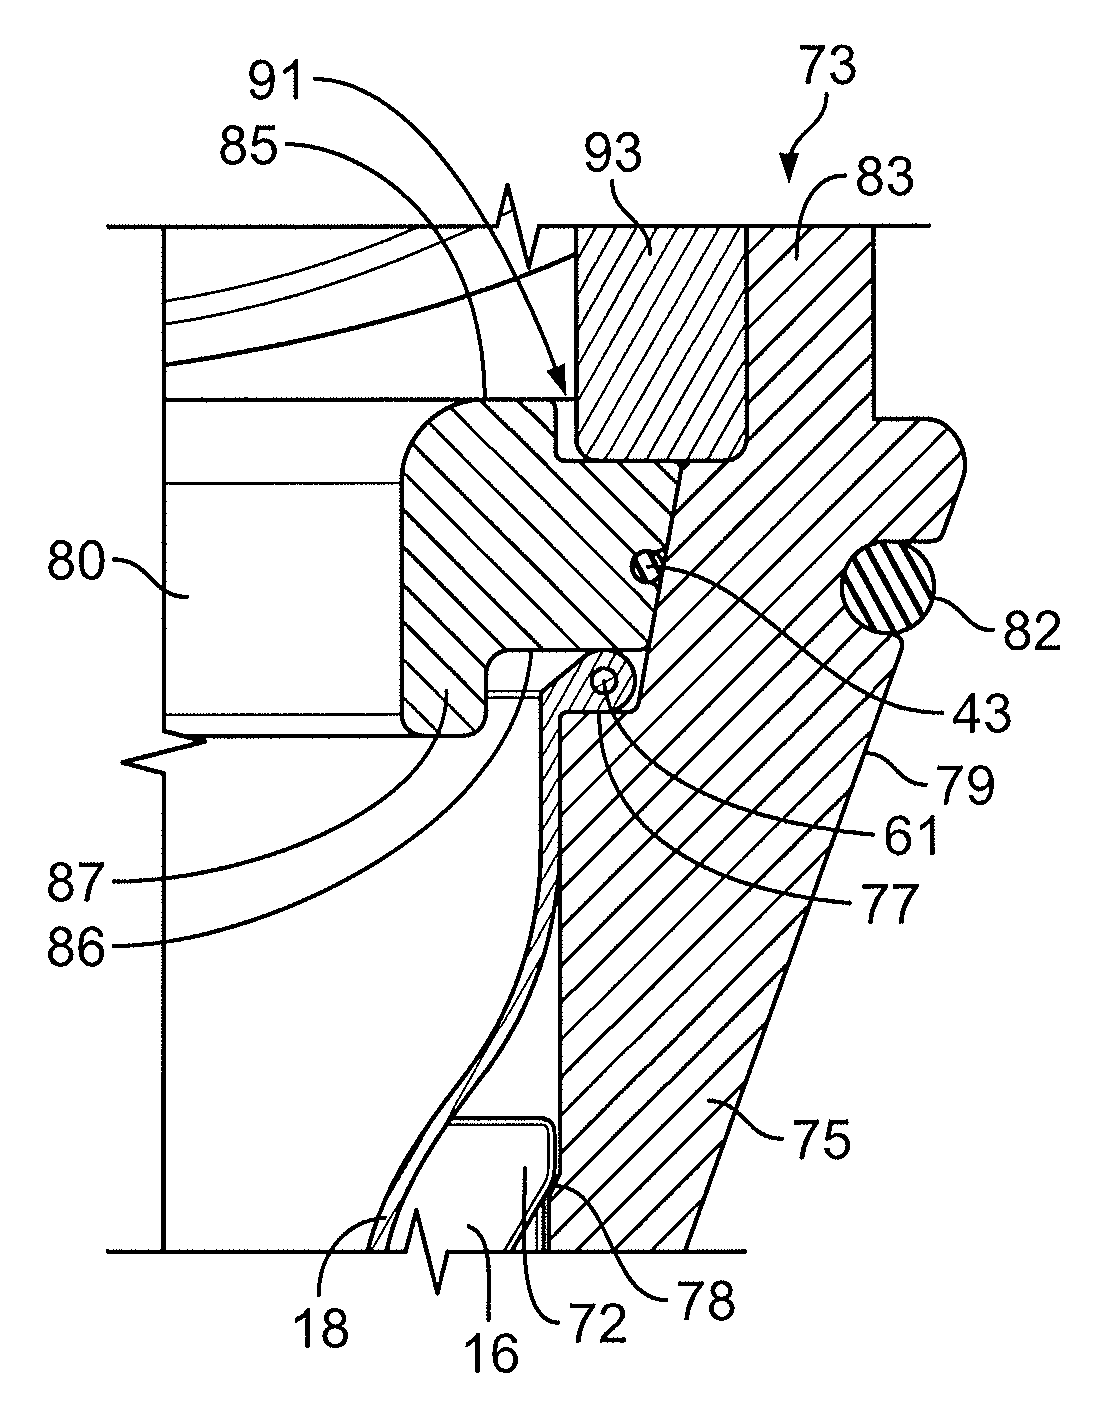 Filter vessel assembly and related methods of use